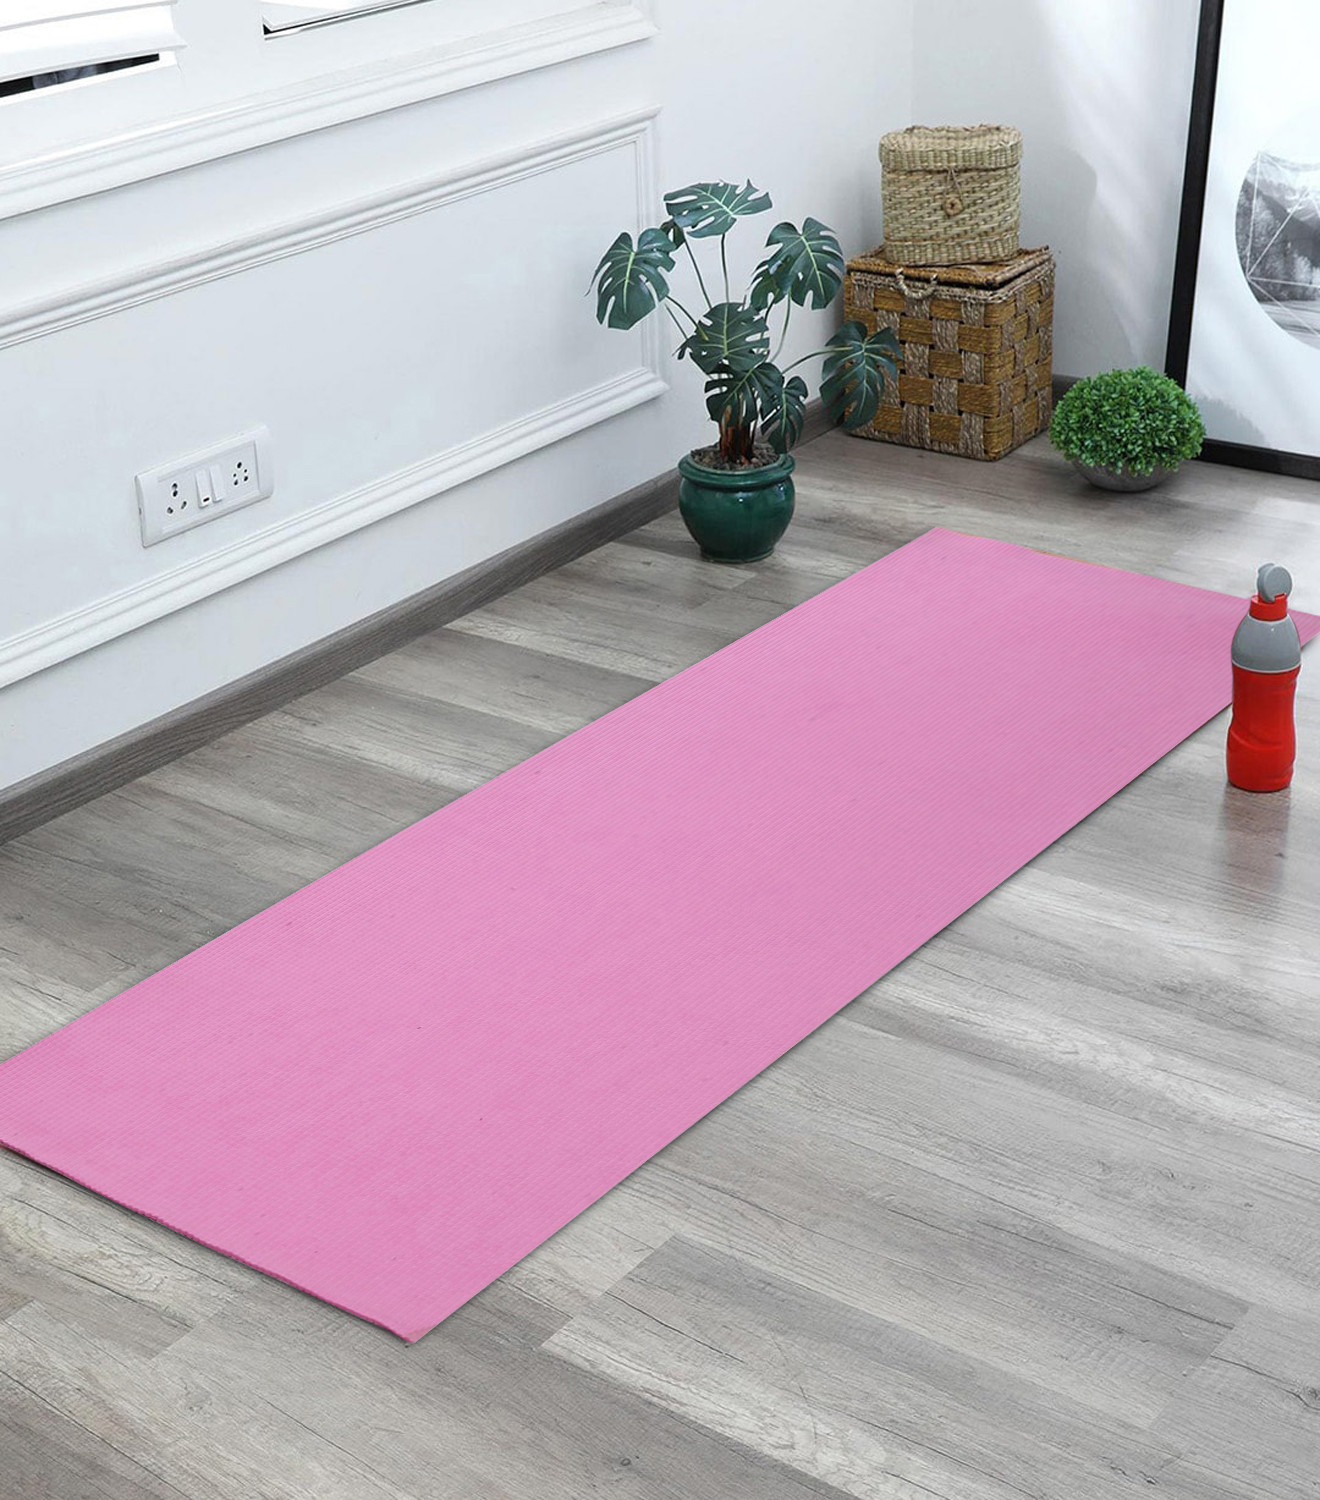 Kuber Industries 4 MM Extra Thick Yoga mat for Gym Workout and Flooring Exercise Long Size Yoga Mat for Men and Women, 6 x 2 Feet (Pink)-33_S_KUBQMART11576